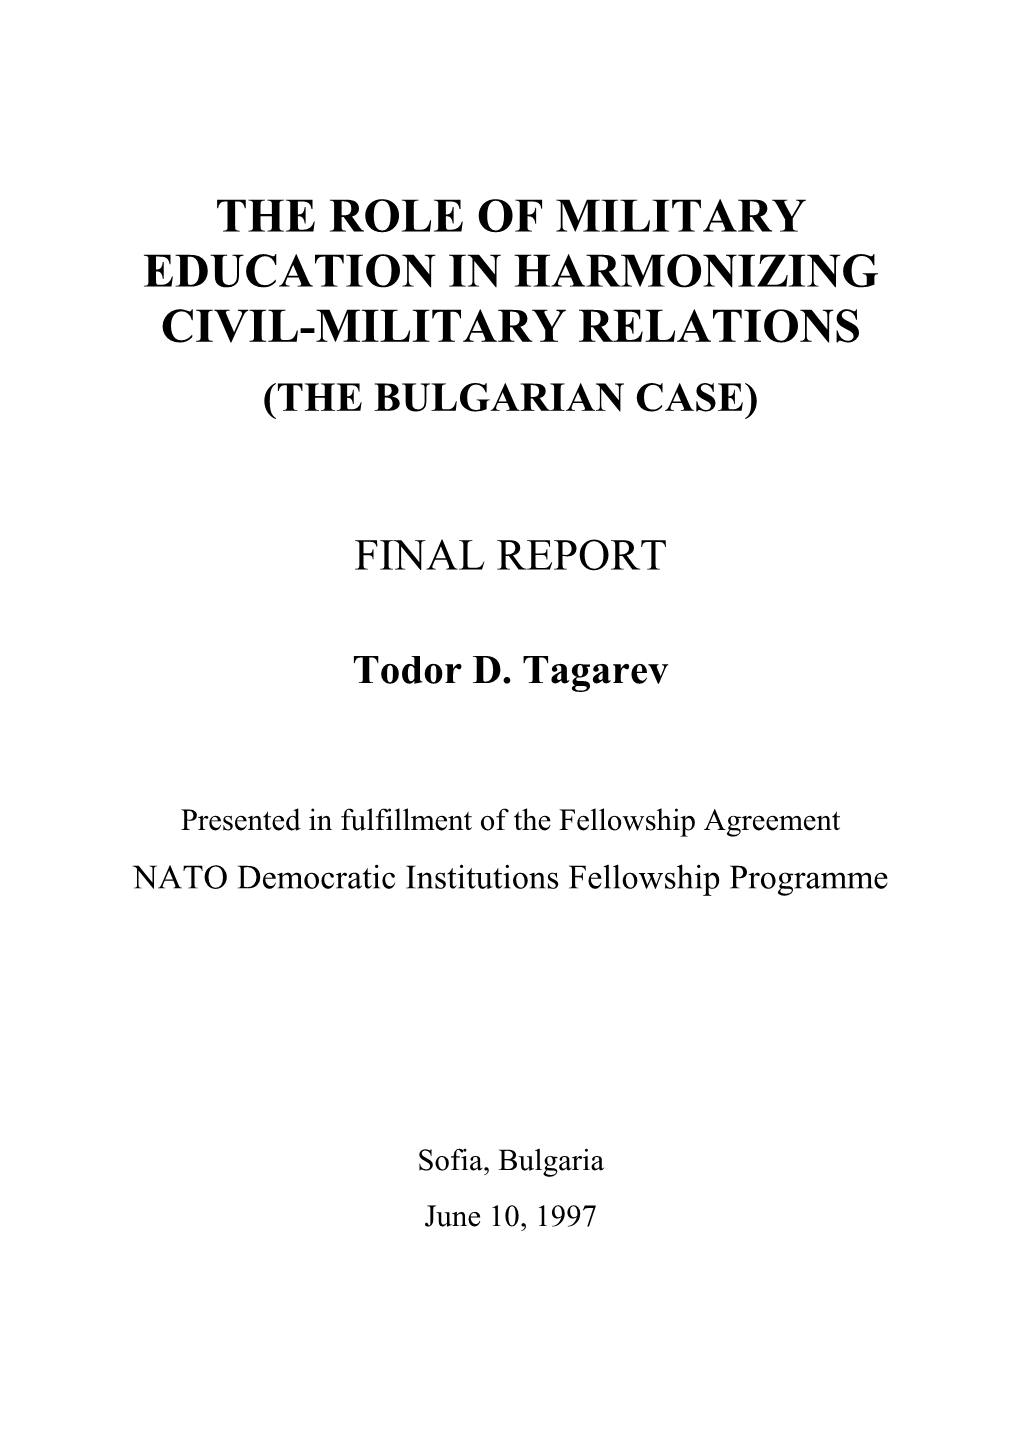 The Role of Military Education in Harmonizing Civil-Military Relations (The Bulgarian Case)